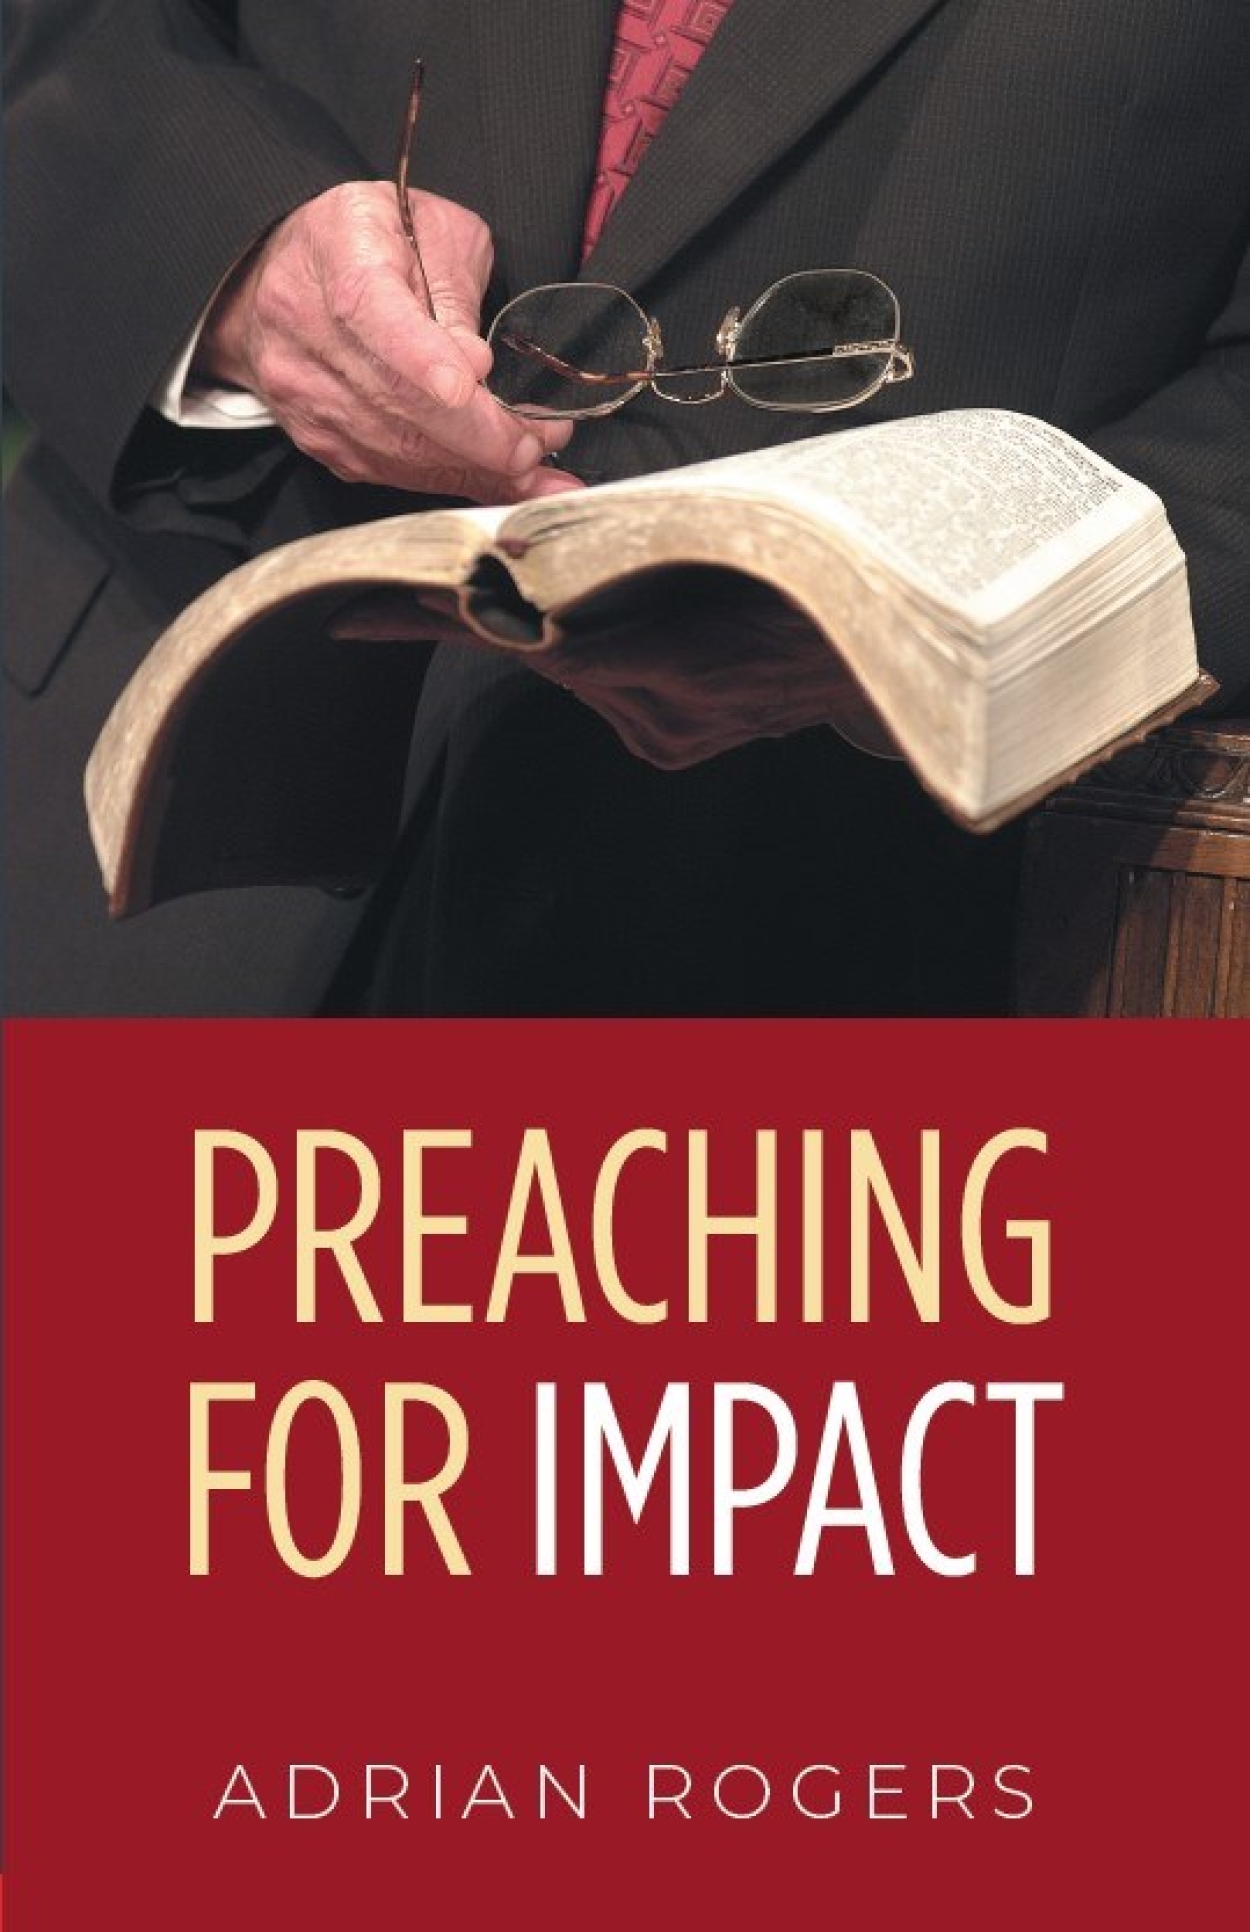 B135 preaching for impact book STORE DETAIL front